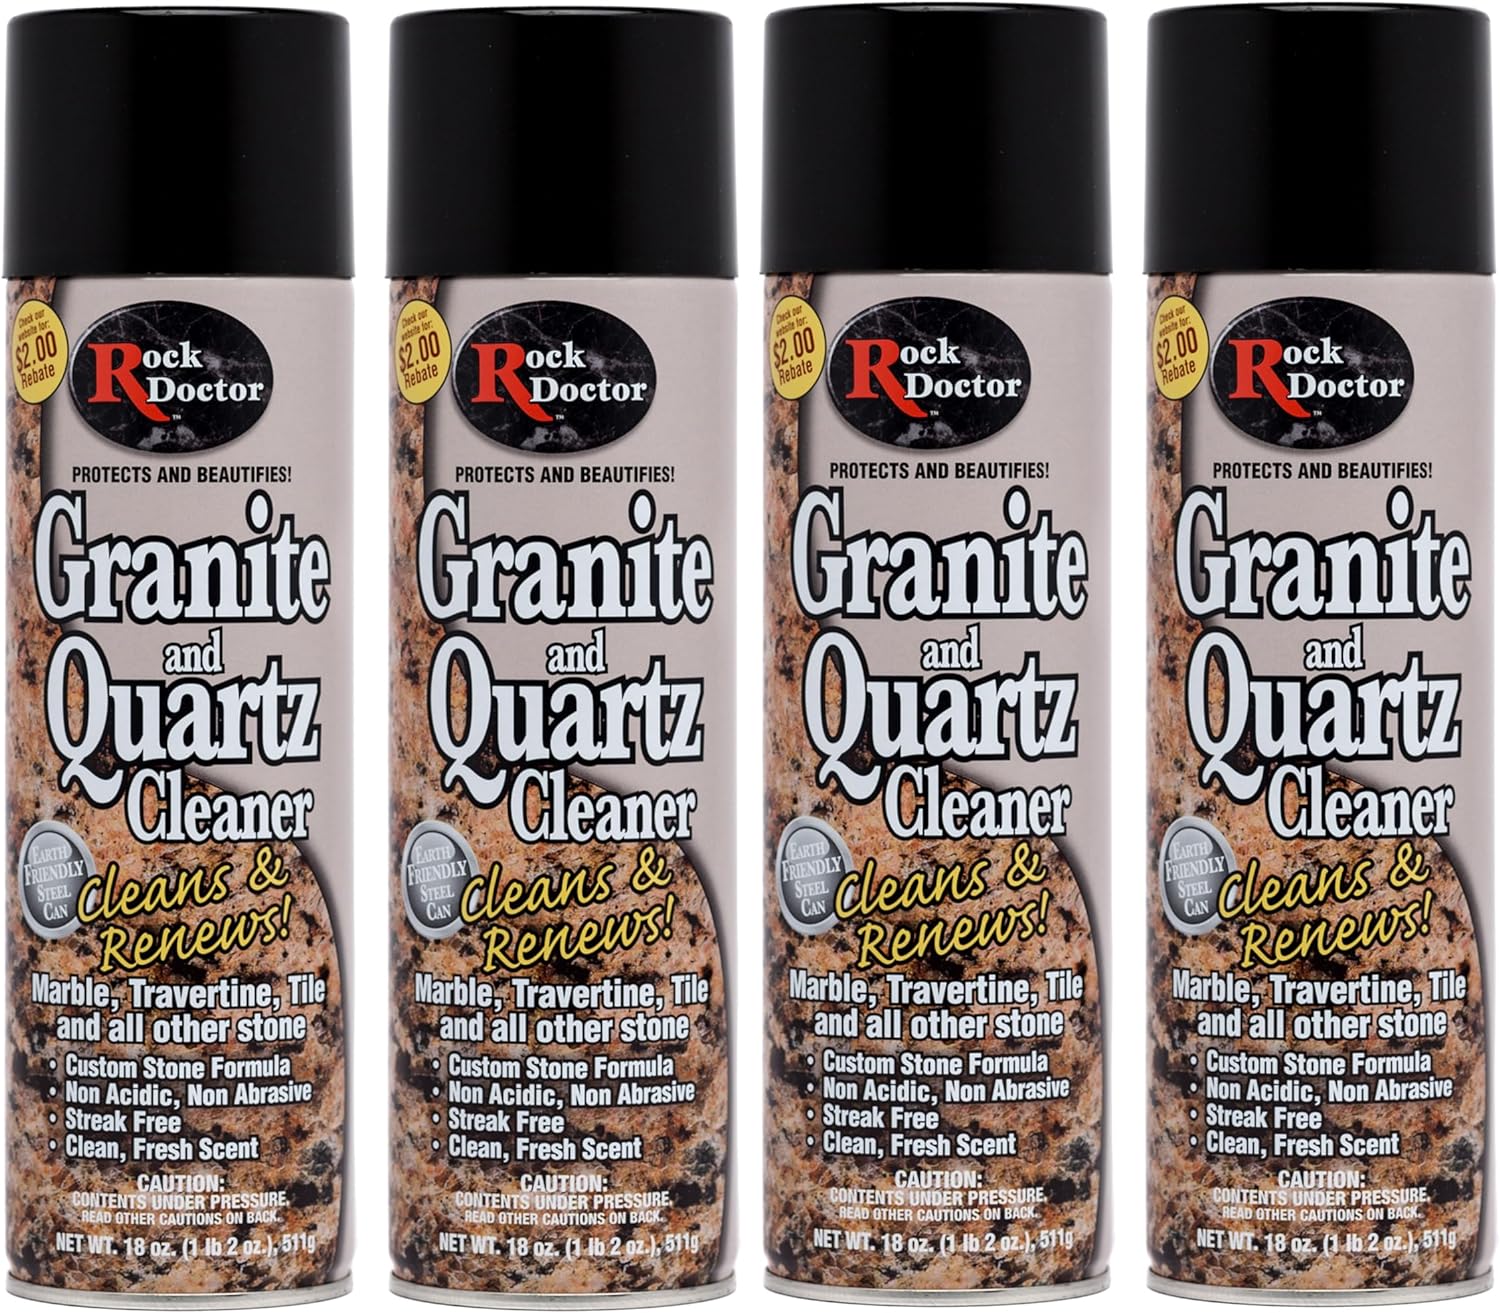 Rock Doctor Granite Cleaner - Cleans& Renews Surfaces - 18 oz Surface Cleaner Spray, Granite/Marble Countertop Cleaner, Cleaning Spray for Vanity, Table Top, Kitchen Counters, Stone Surfaces Pack of 4